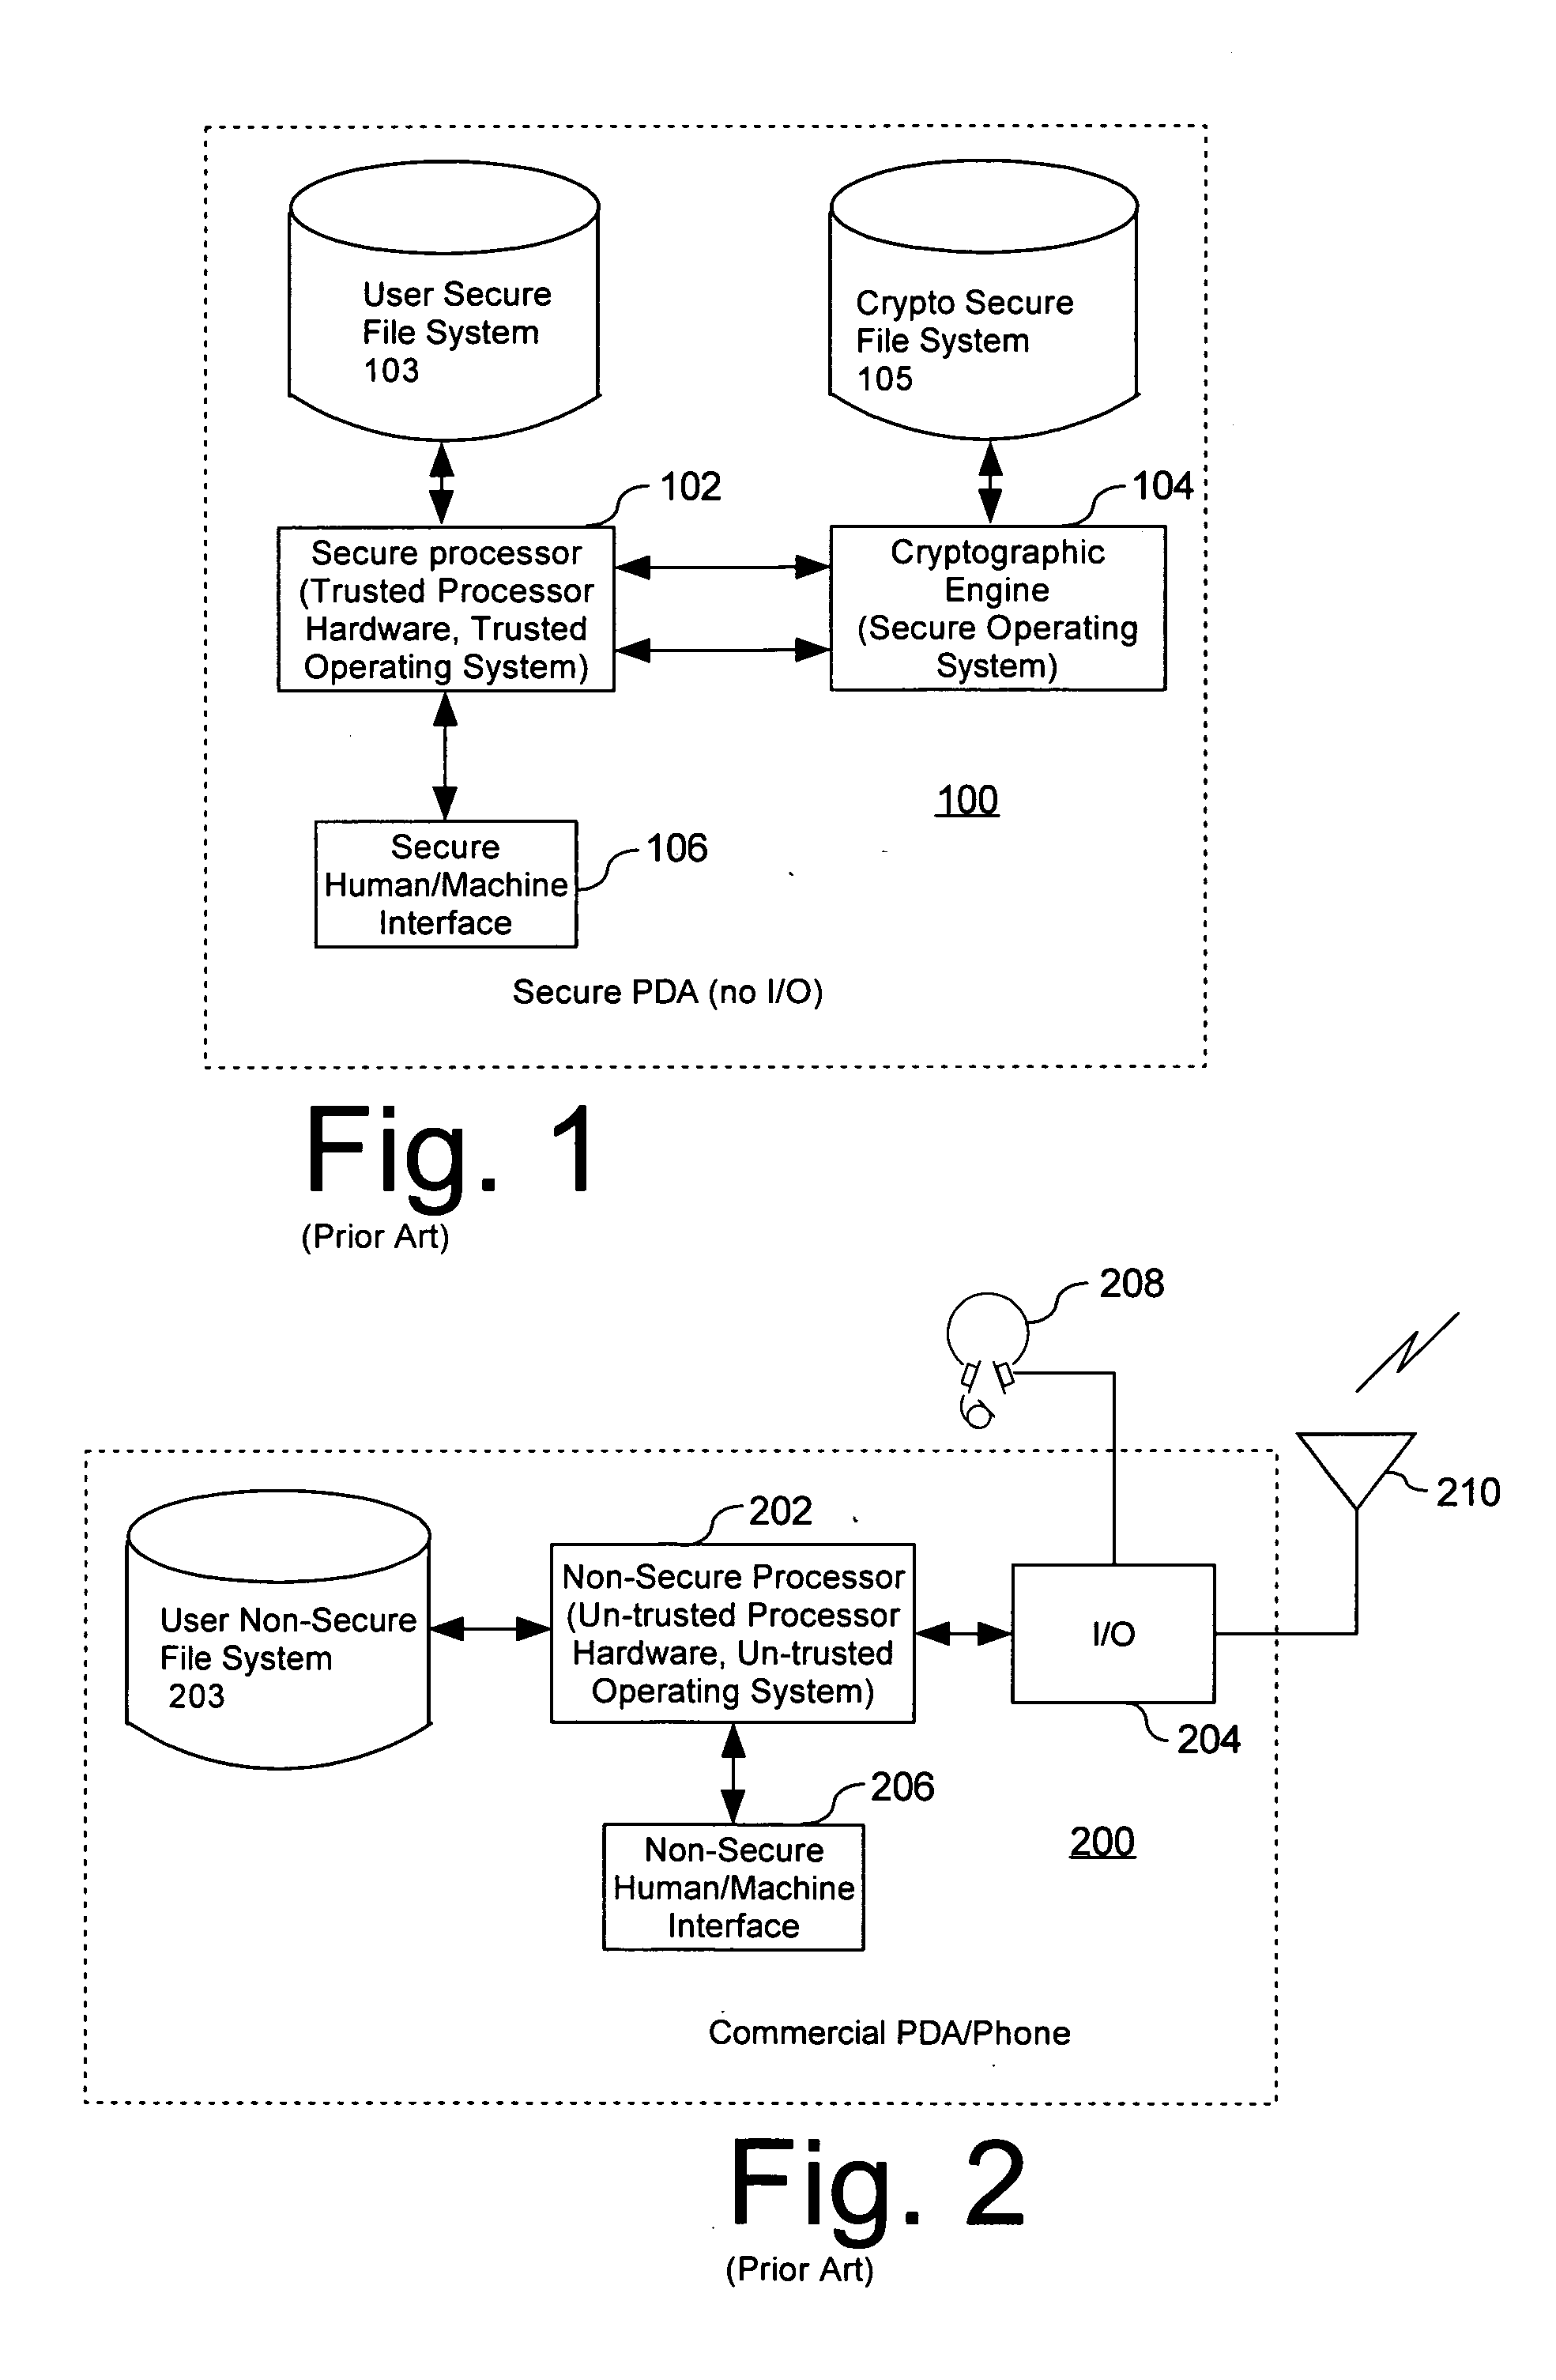 Computer architecture for a handheld electronic device with a shared human-machine interface